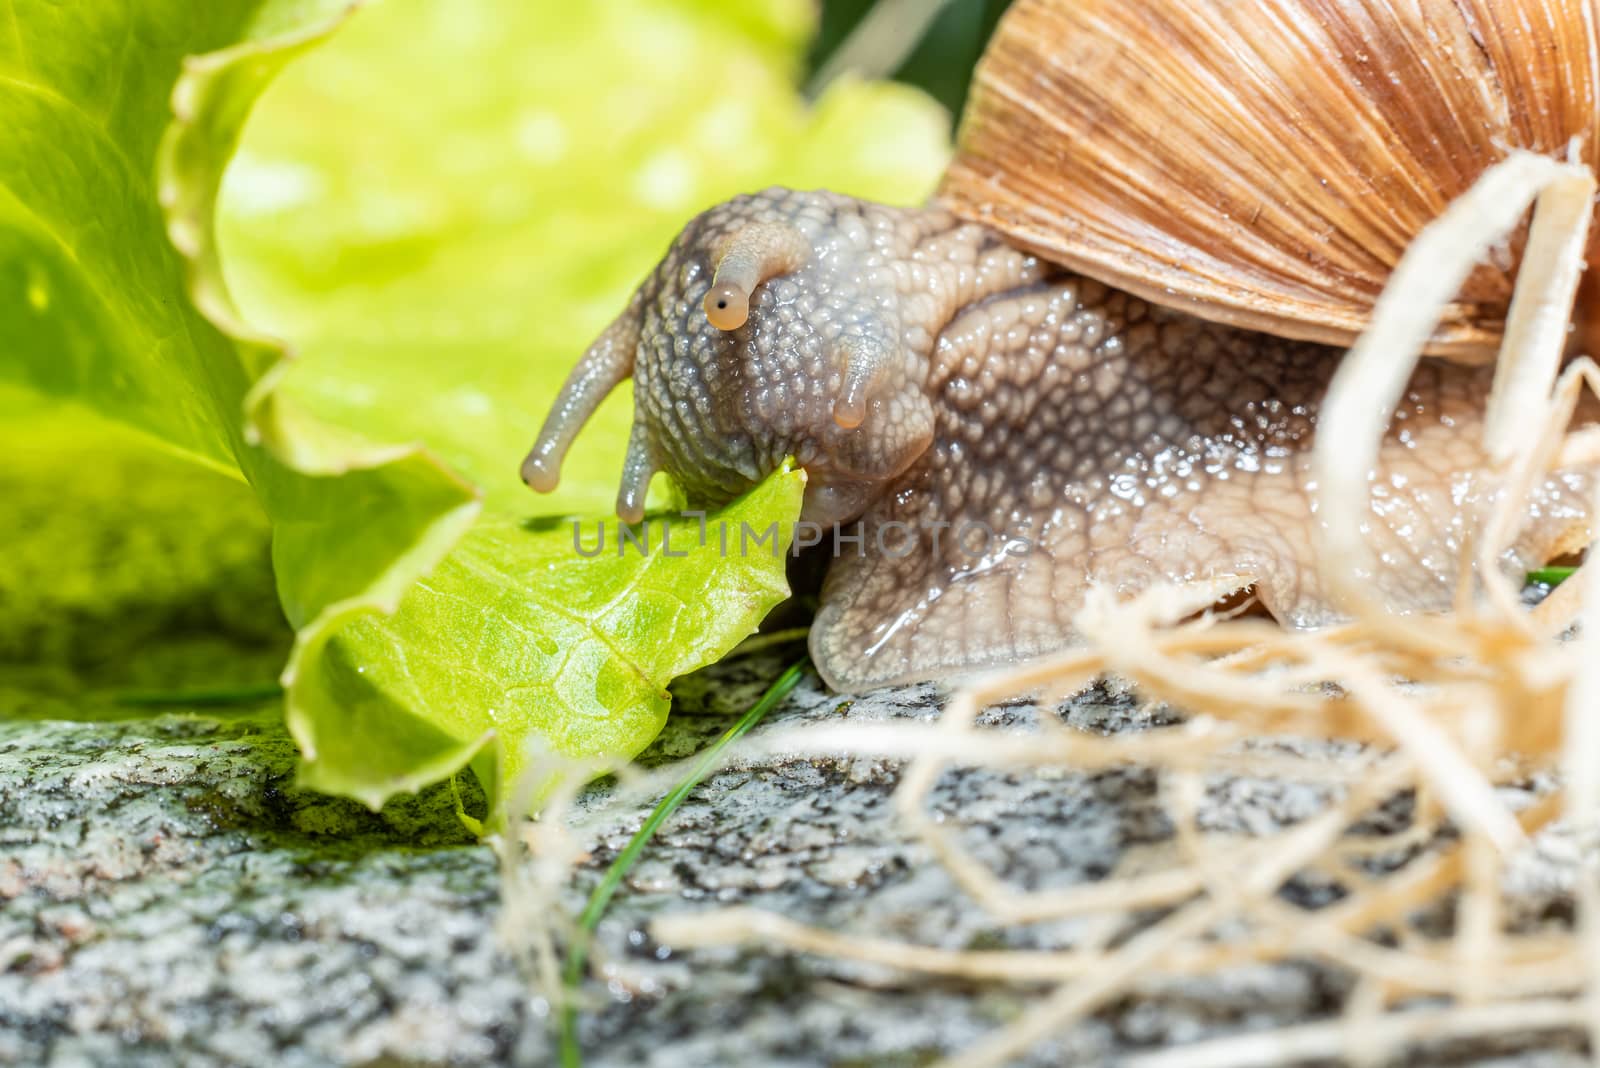 Macro close-up of a Burgundy snail eating a lettuce leaf with the antennae retracted leaf pulling it with the mouthparts leaf - jaw visible leaf - closing the mouth by Umtsga